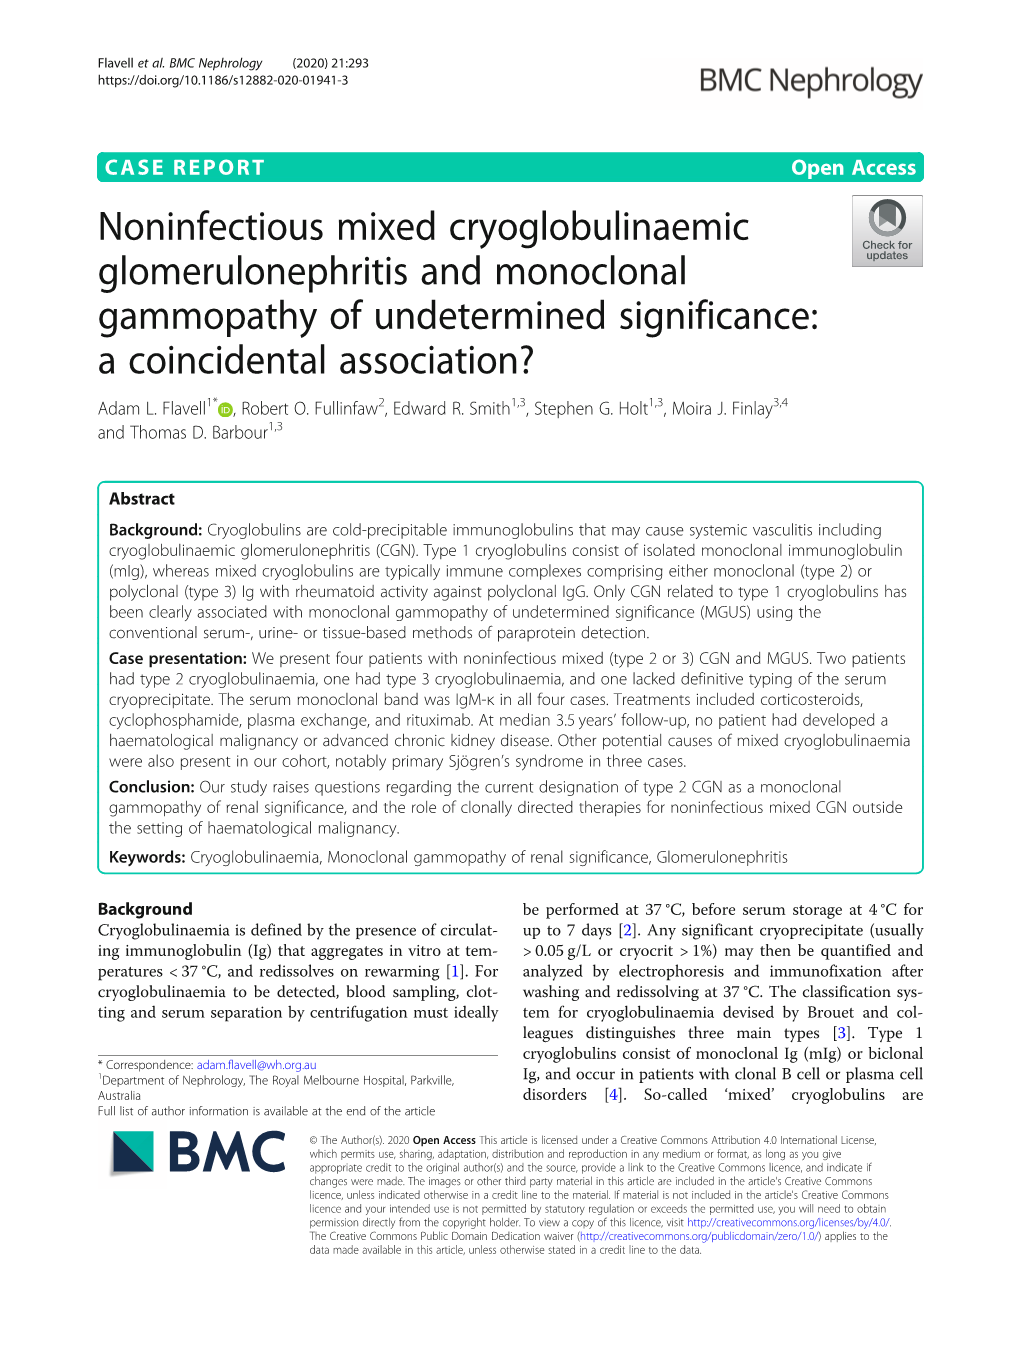 Noninfectious Mixed Cryoglobulinaemic Glomerulonephritis and Monoclonal Gammopathy of Undetermined Significance: a Coincidental Association? Adam L